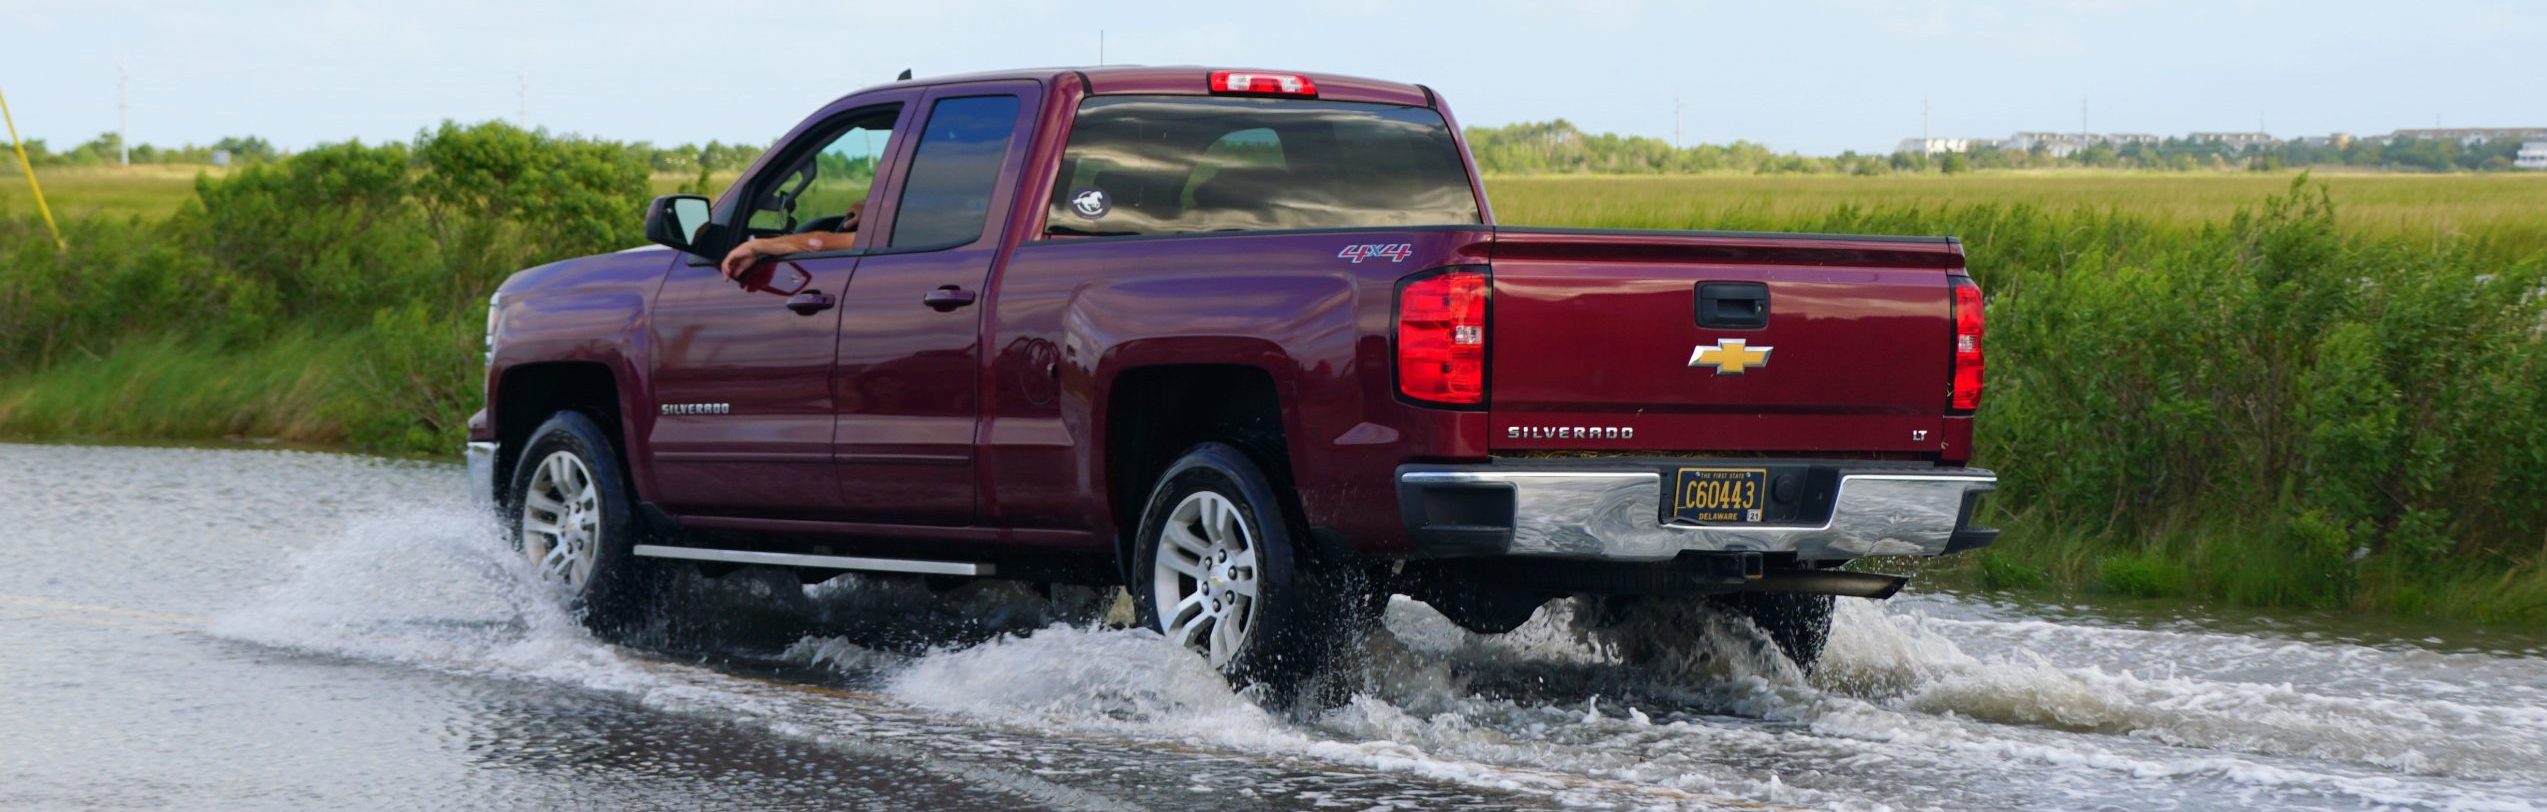 A red Chevy Silverado truck passing the flooded road - Are Chevys good cars and are chevy trucks reliable concept image